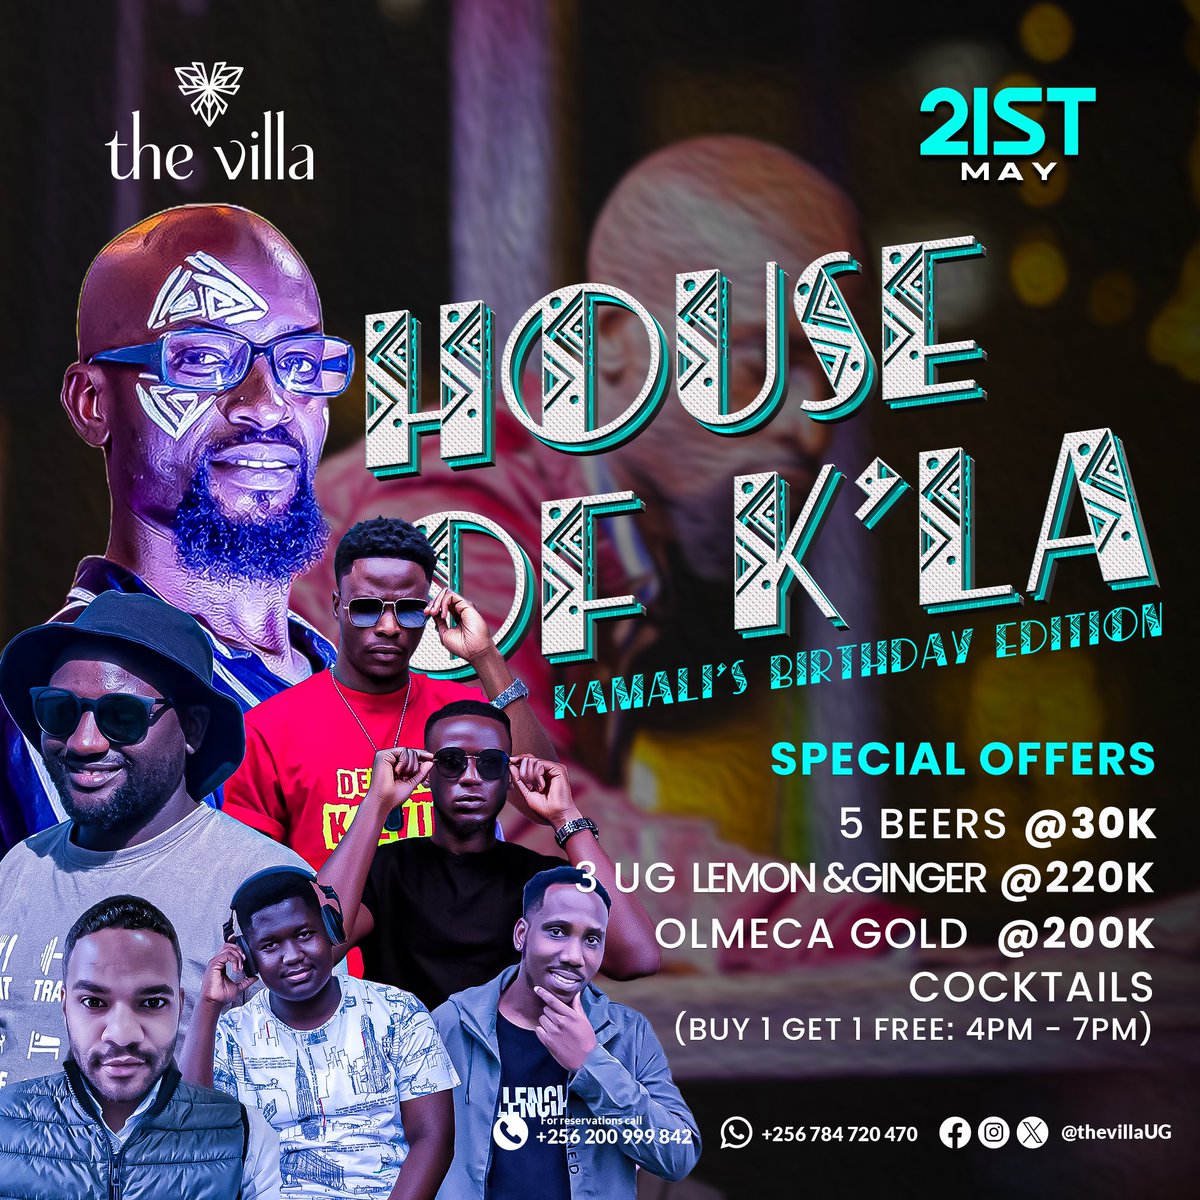 On Tuesday at @thevillaUG it's #HouseofKla and tomorrow is the day! Featuring the incredible Dj 2nyuke (@FelixDonBash), Sexxy Beast, Jenkins, @Count_Melvin, @Andrey256_, Dj Kalvin, and yours truly. So, don't miss out on this amazing night. See you there!